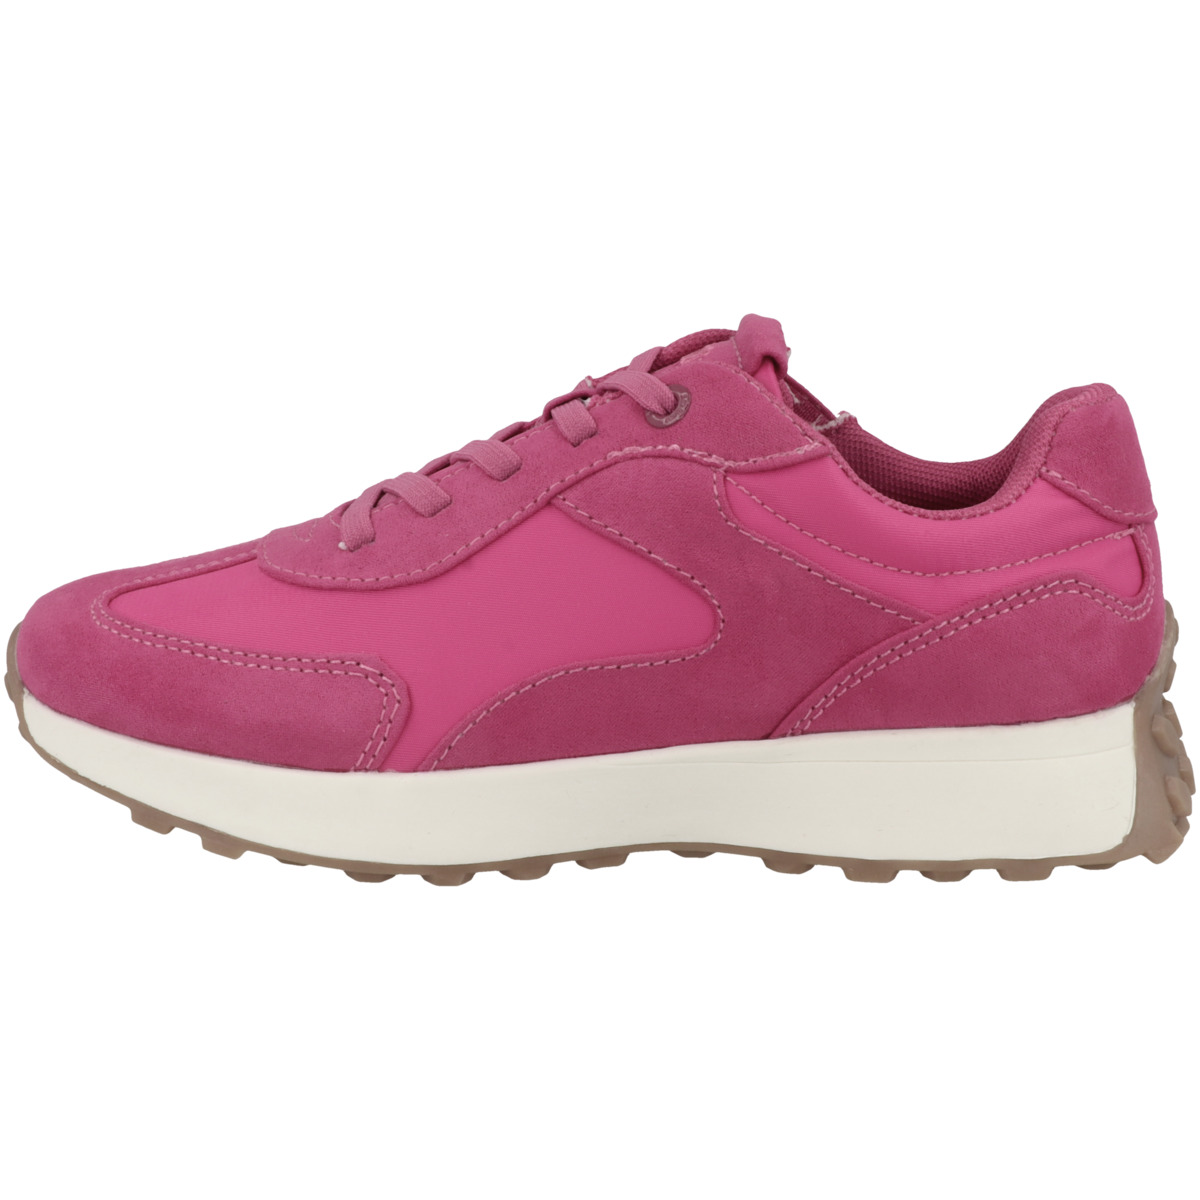 s.Oliver 5-43208-30 Sneaker low pink